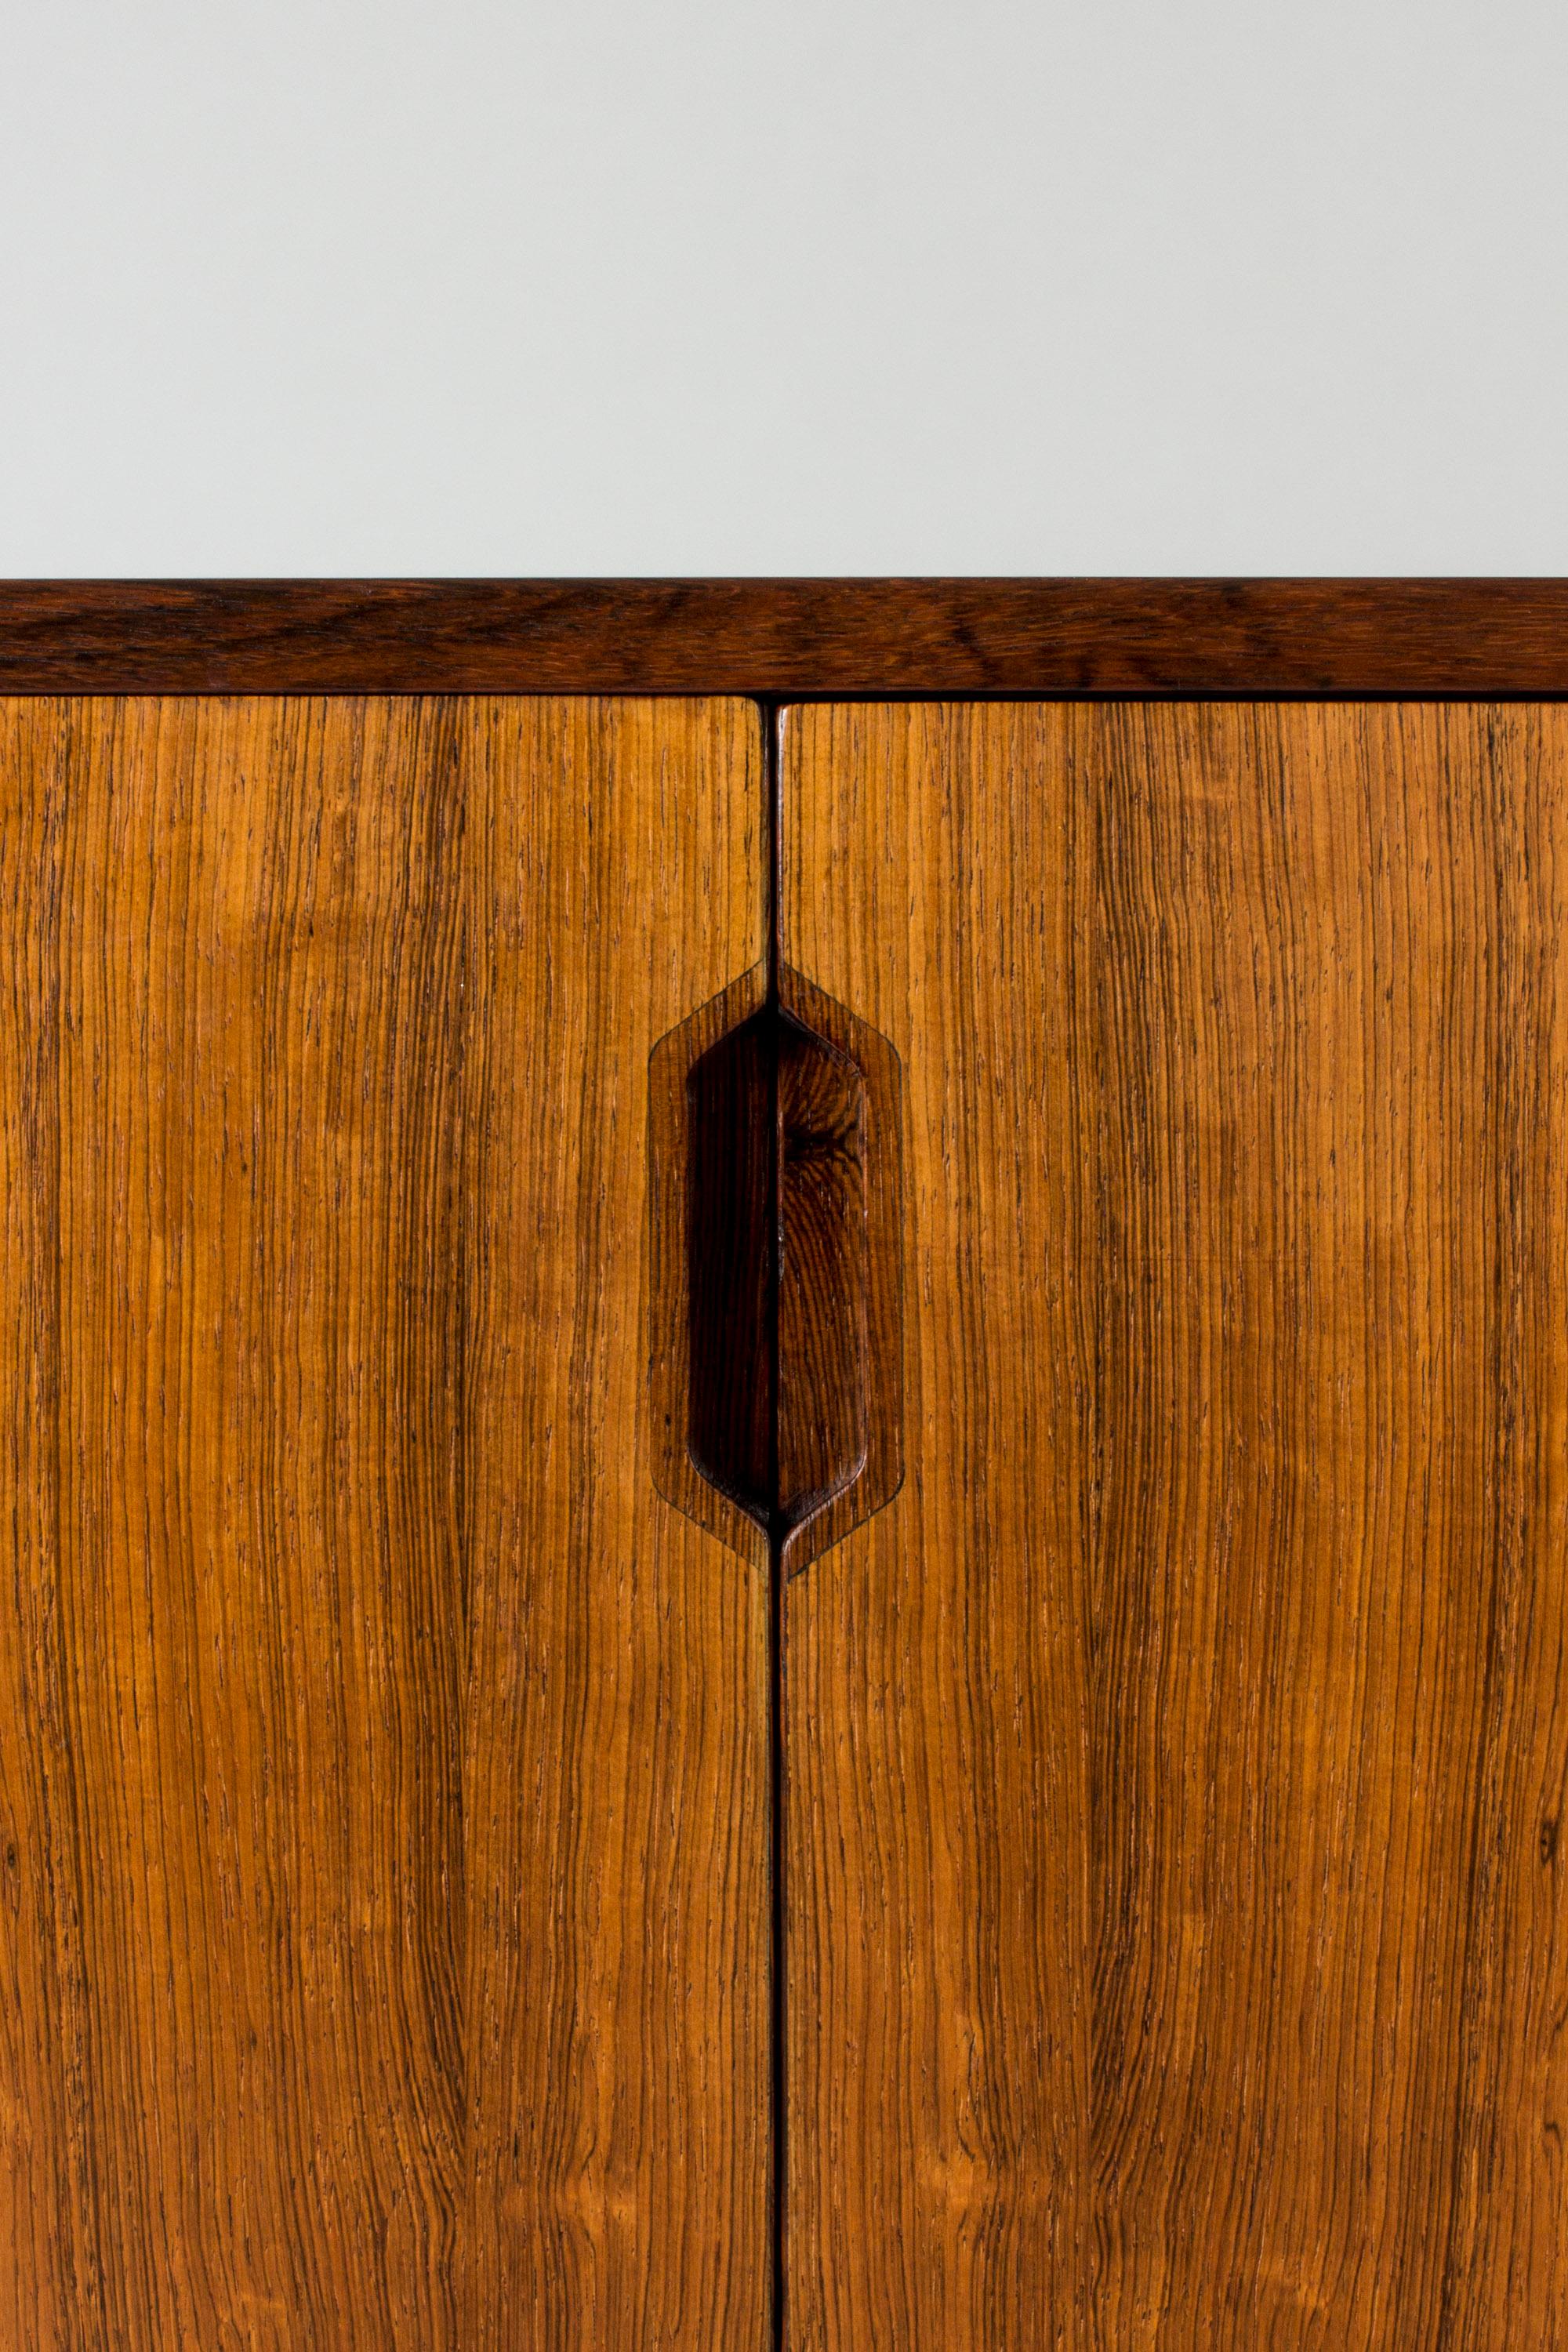 Danish Midcentury Rosewood and Brass Sideboard by Svend Langkilde, 1960s For Sale 3